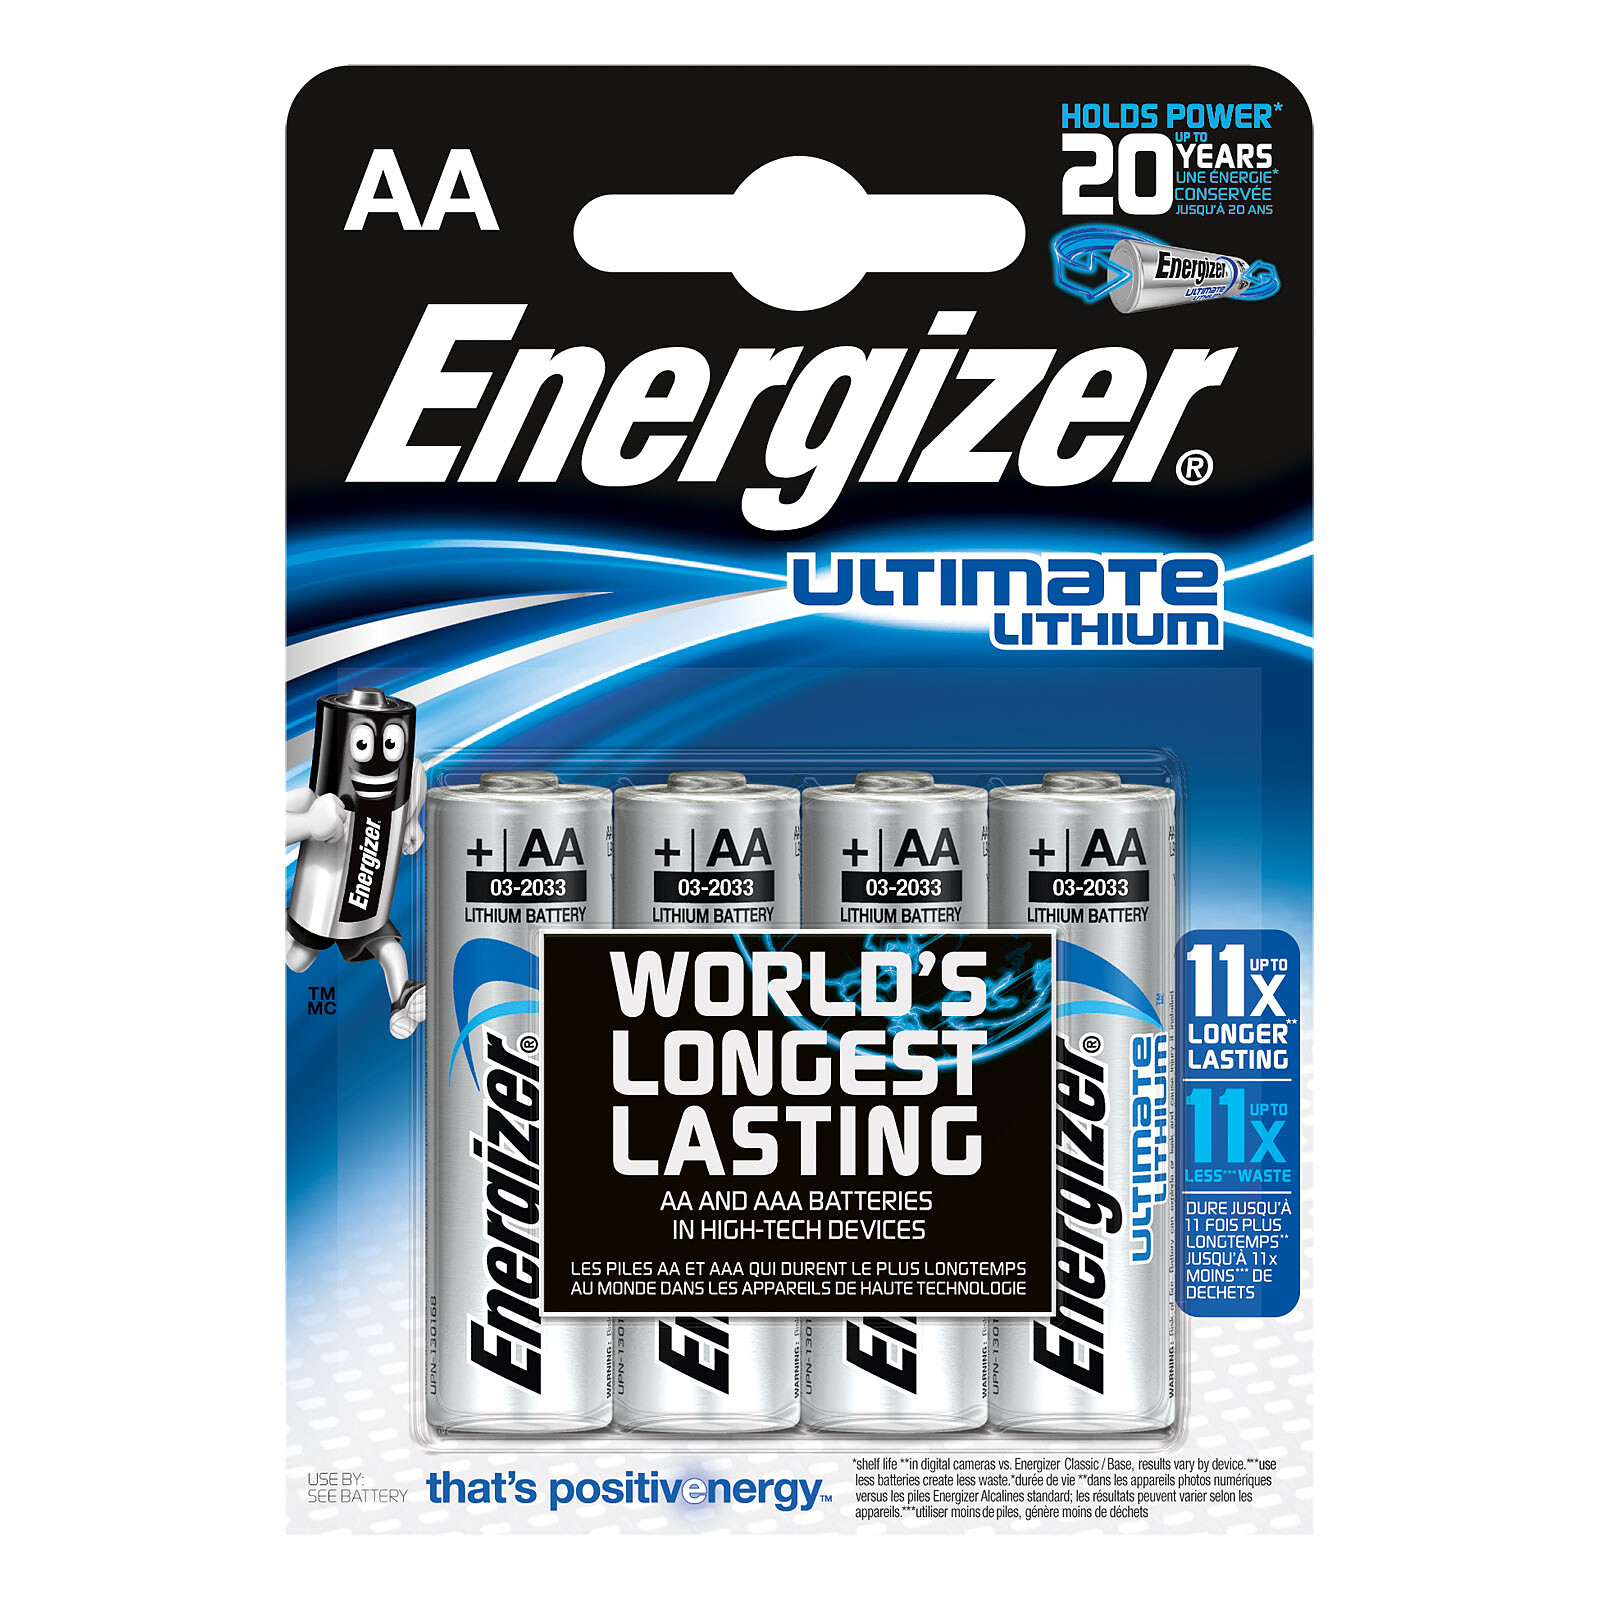 Energizer Ultimate Lithium AA Batterie pack of 4, 9,99 €